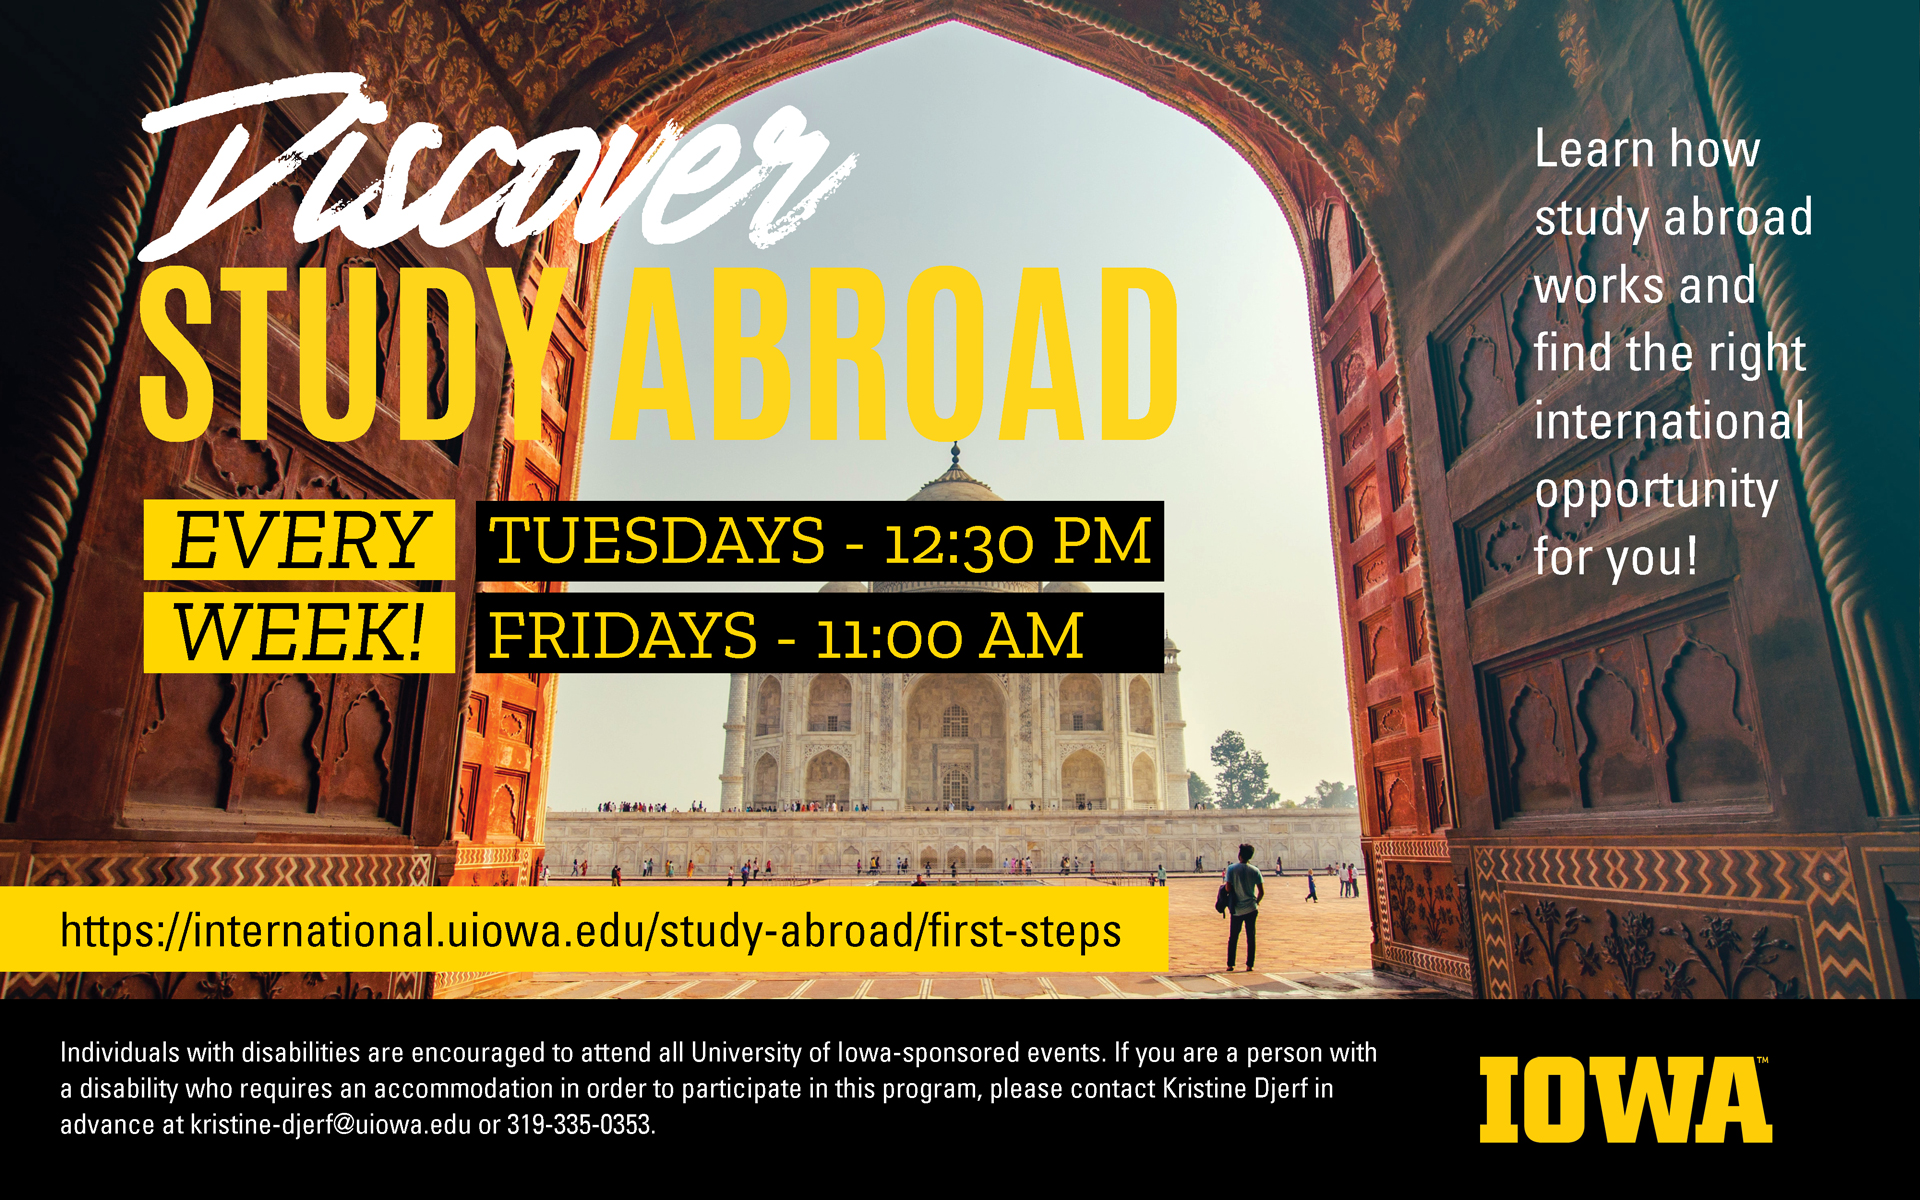 An image advertising Discover Study Abroad sessions. Reads: "Discover Study Abroad. Every week! Tuesdays - 12:30 PM, Fridays - 11:00 AM. Learn how study abroad works and find the right international opportunity for you! https://international.uiowa.edu/study-abroad/first-steps. Individuals with disabilities are encouraged to attend all University of Iowa-sponsored events. If you are a person with a disability who requires a reasonable accommodation in order to participate in this program, please contact Kristine Djerf in advance at 319-335-0353."